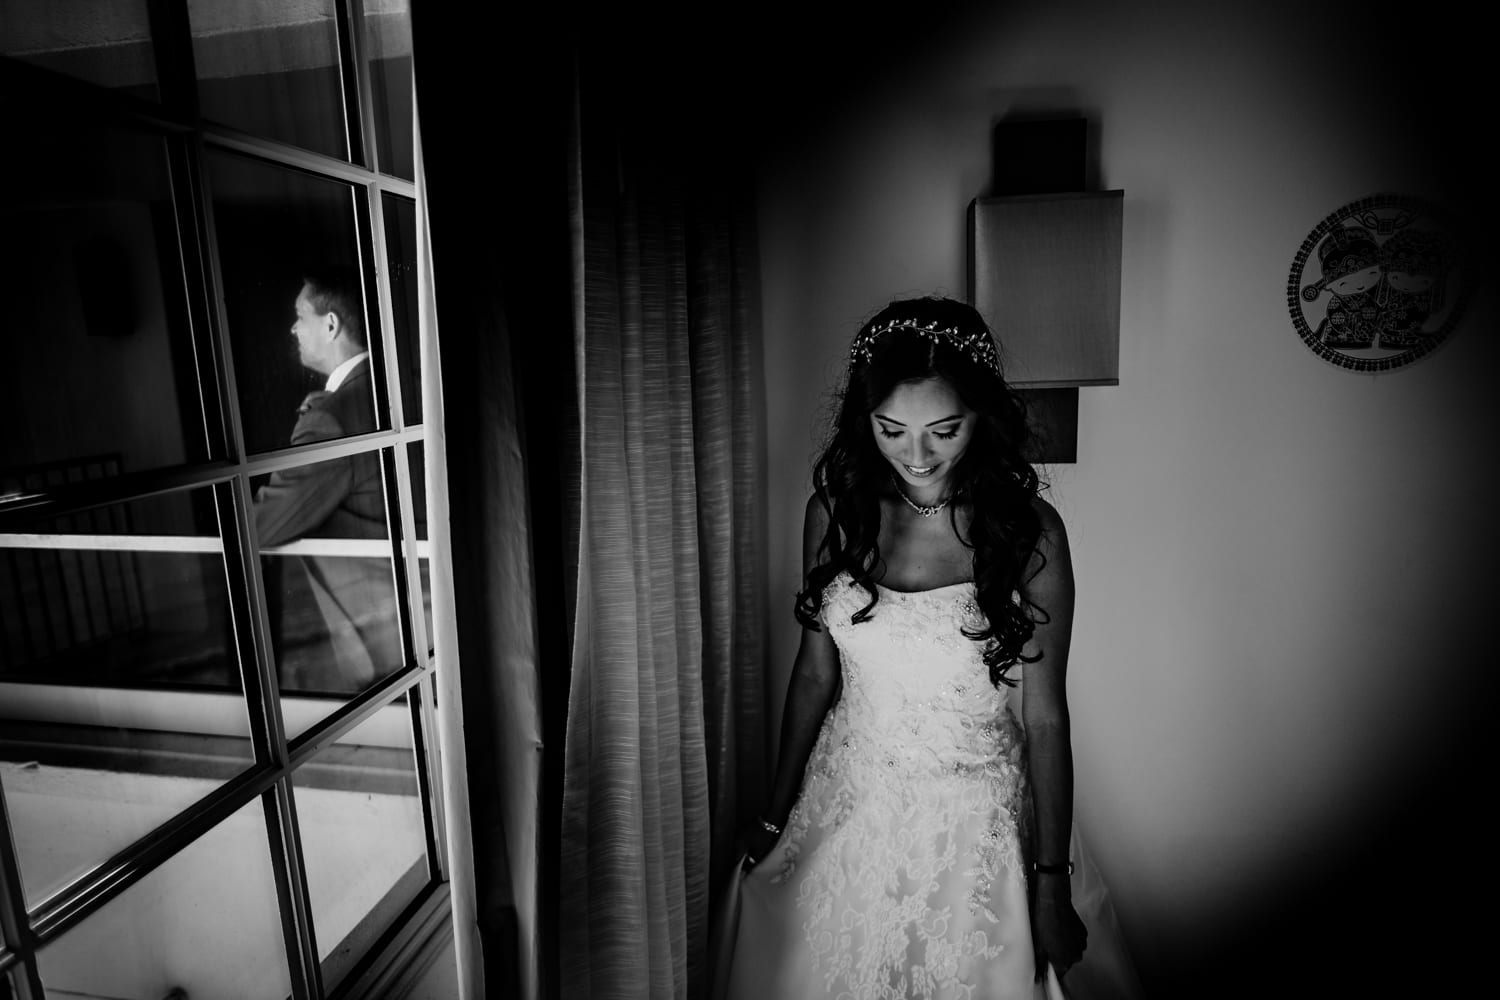 A bride in a wedding dress standing in front of a window.